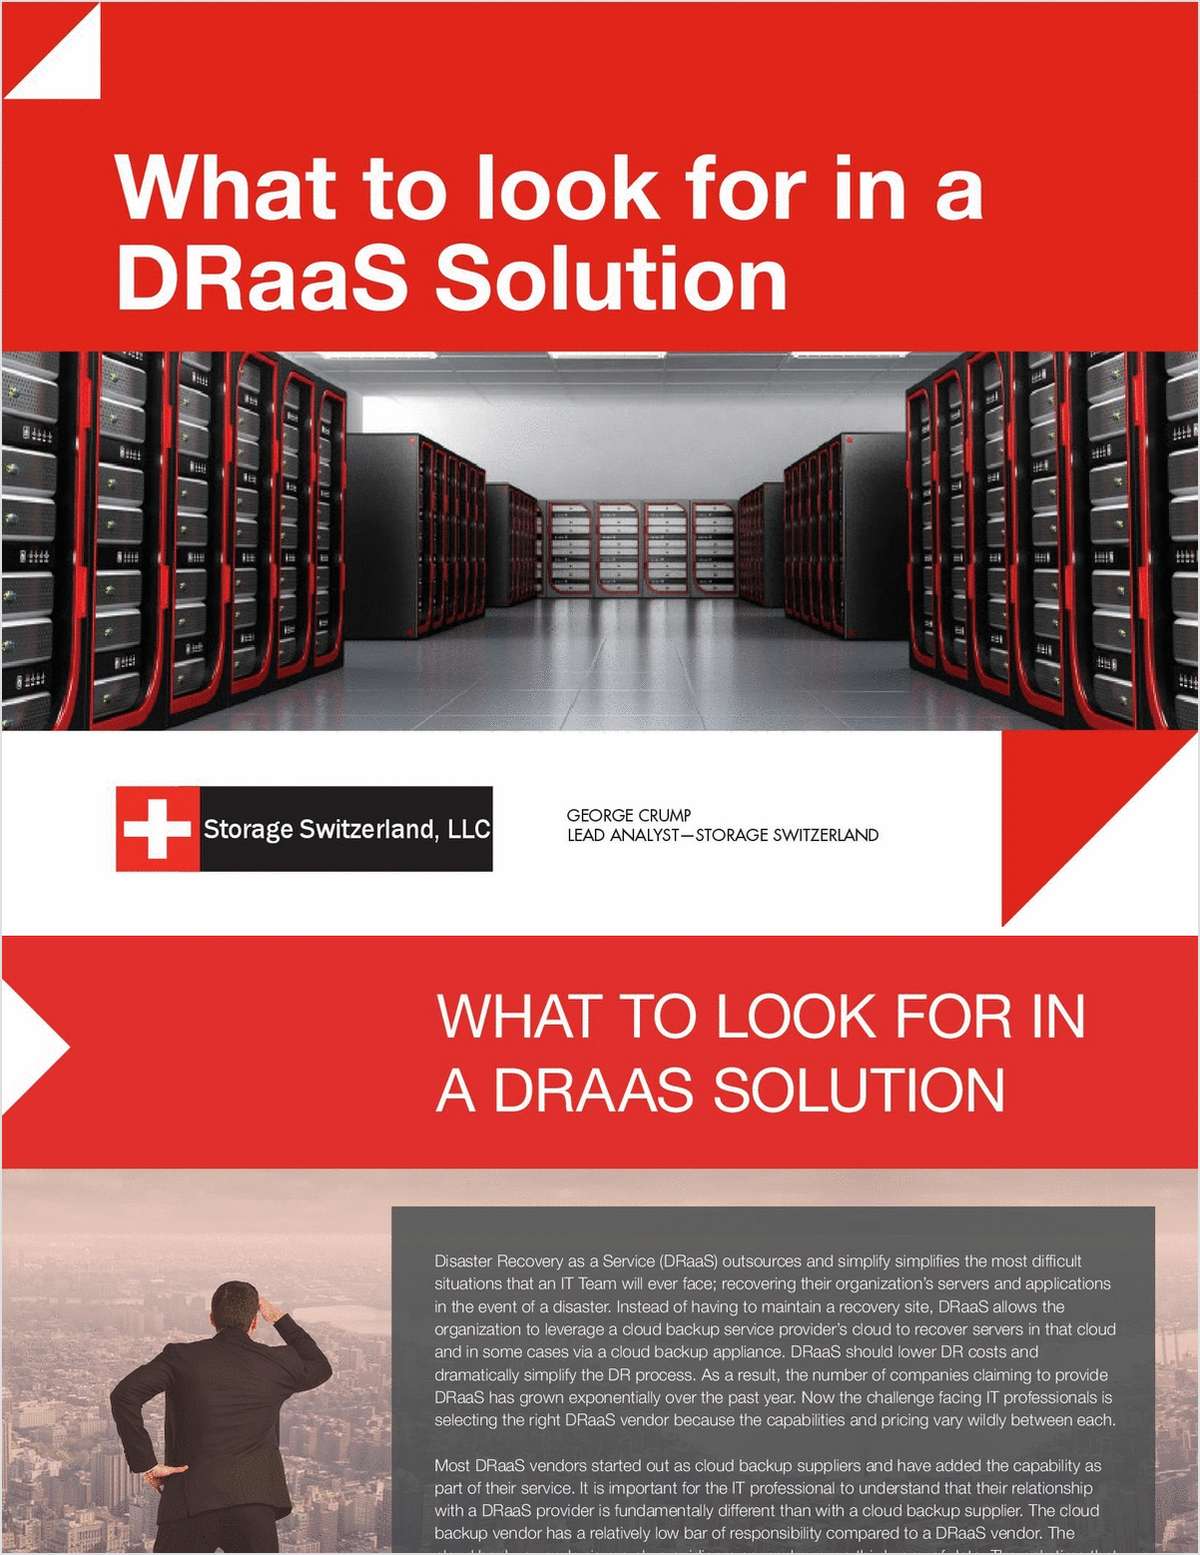 What to Look for in a DRaaS Solution